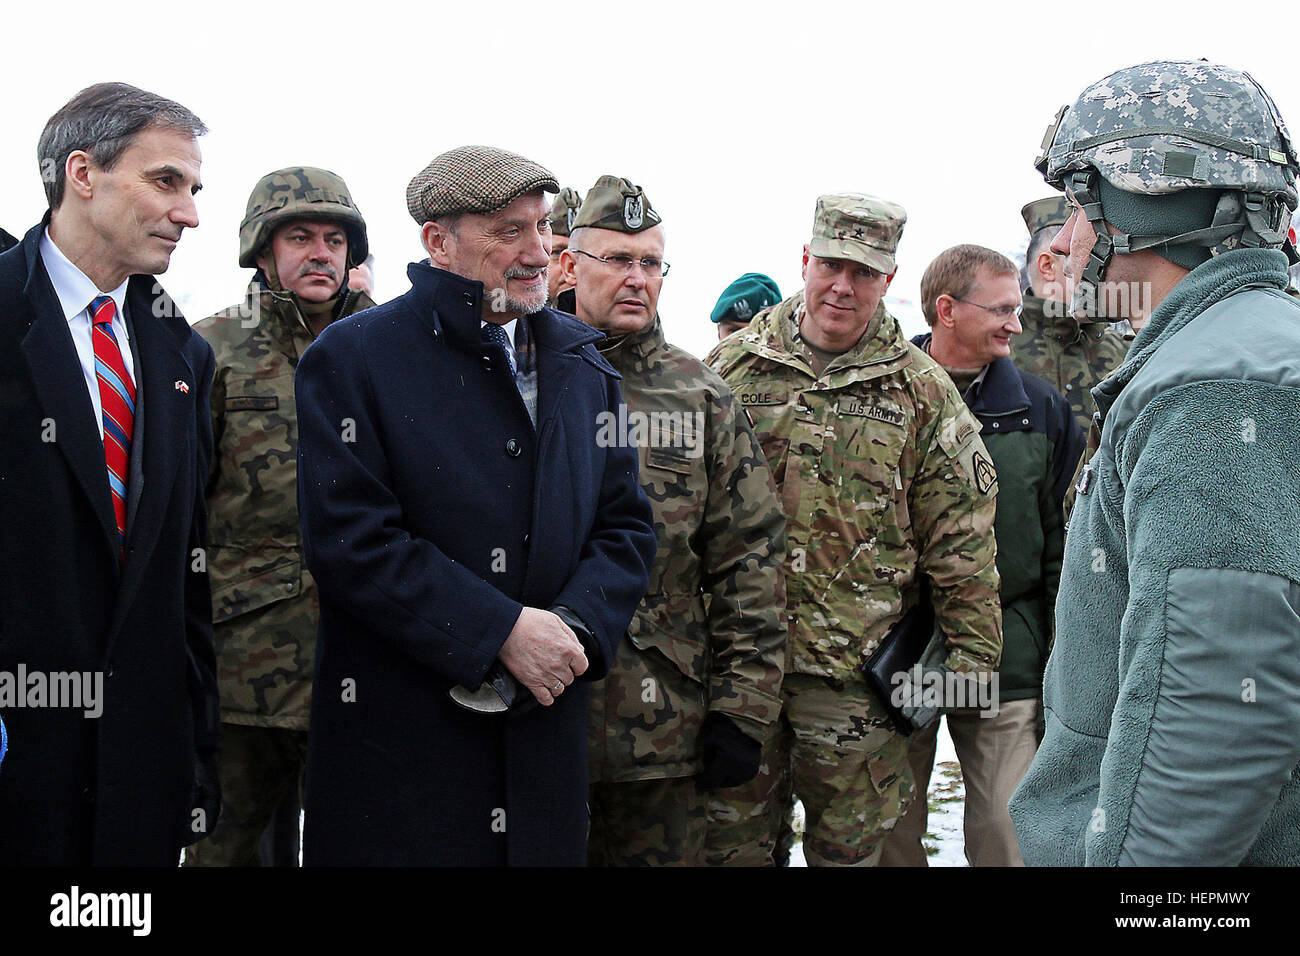 Paul Jones (far left), U.S. ambassador to Poland, Antoni Macierewicz (center with hands folded), Polish minister of defense, Col. Andrzej Dabrowski (third from right), commander of 3rd Air Defense Brigade, Polish army, Brig. Gen. William Cole (second from right), deputy commanding general of Research, Development and Engineering Command and commander of the U.S. Army Natick Soldier Systems Center, and Capt. David Chavez (far right), commander of A Battery, 5th Battalion, 7th Air Defense Artillery Brigade, speak together about capabilities of their various Patriot missile equipment during Panth Stock Photo